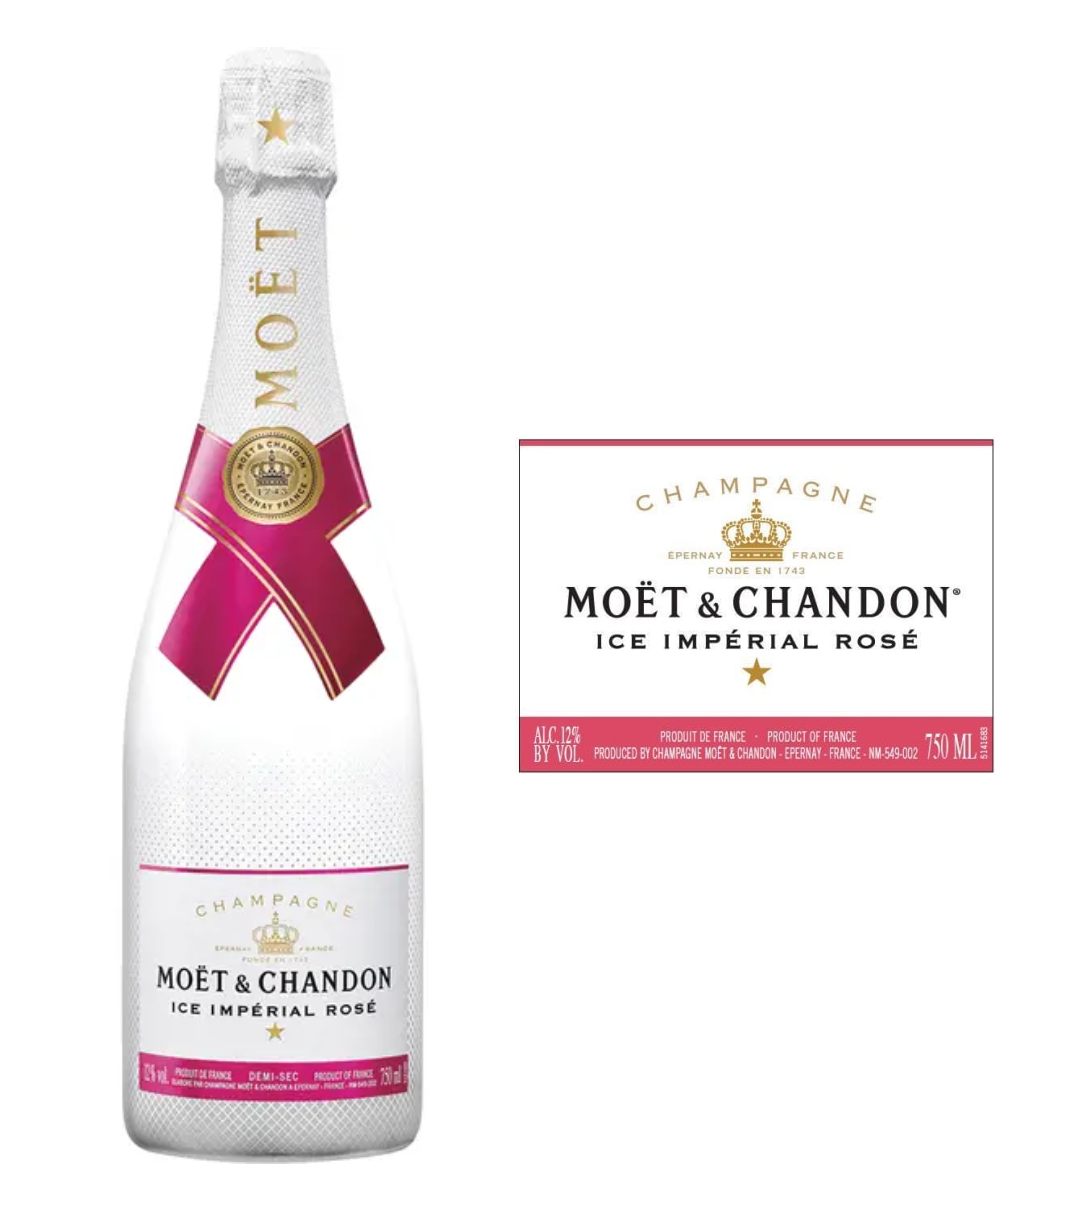 & chandon ice imperial champagne